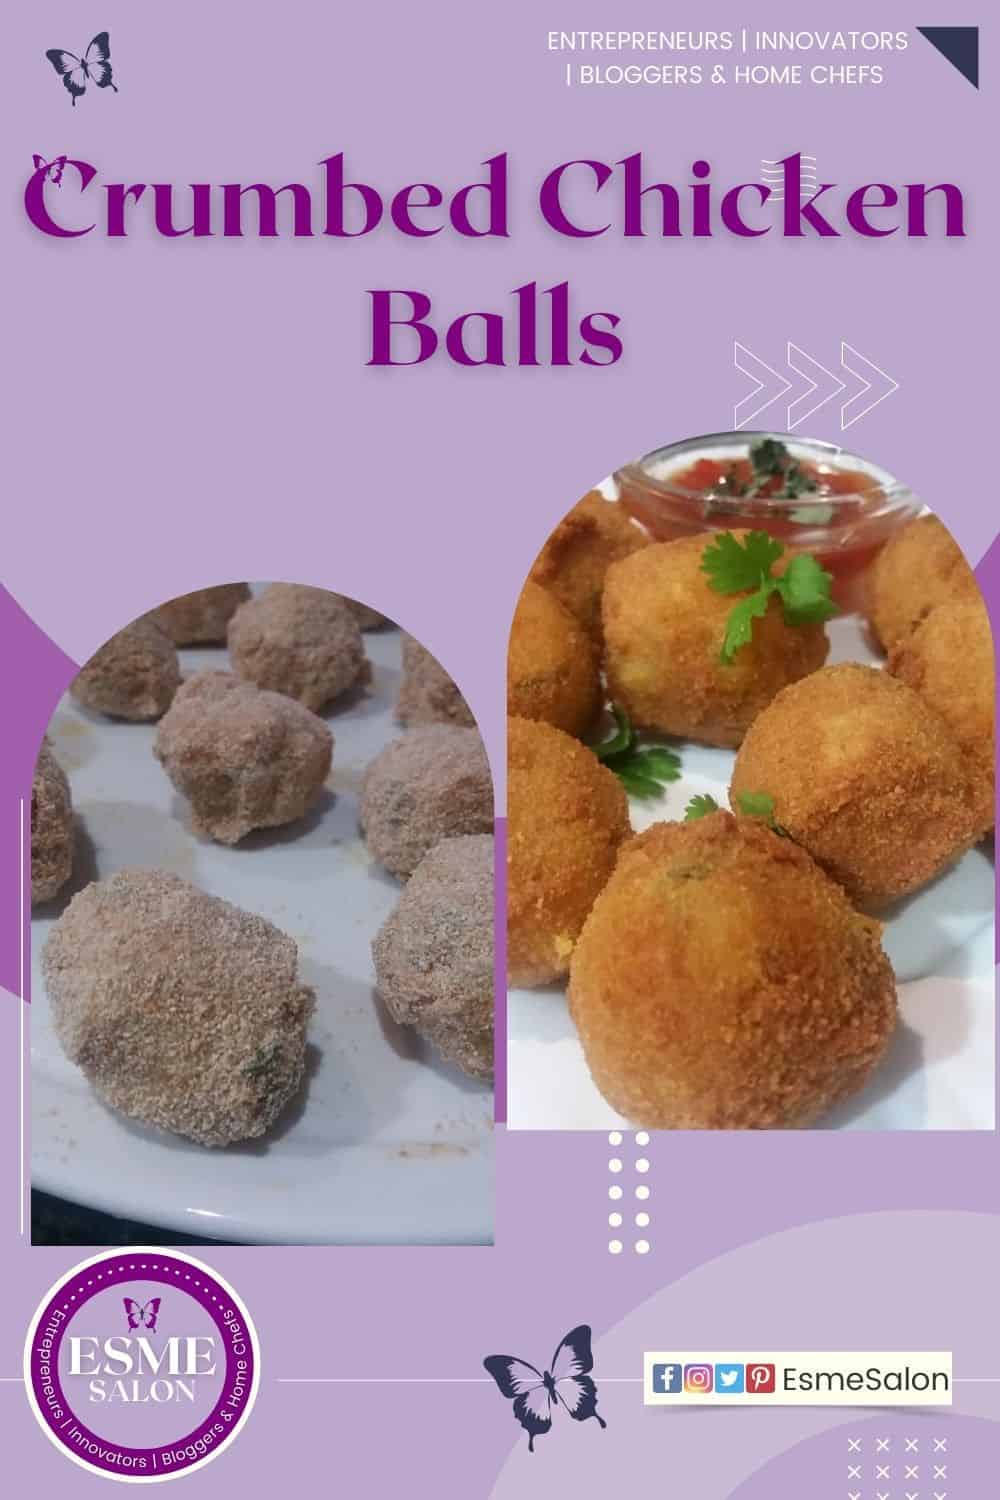 An image of two platters, one with raw crumbed chicken balls and the other already deep fried